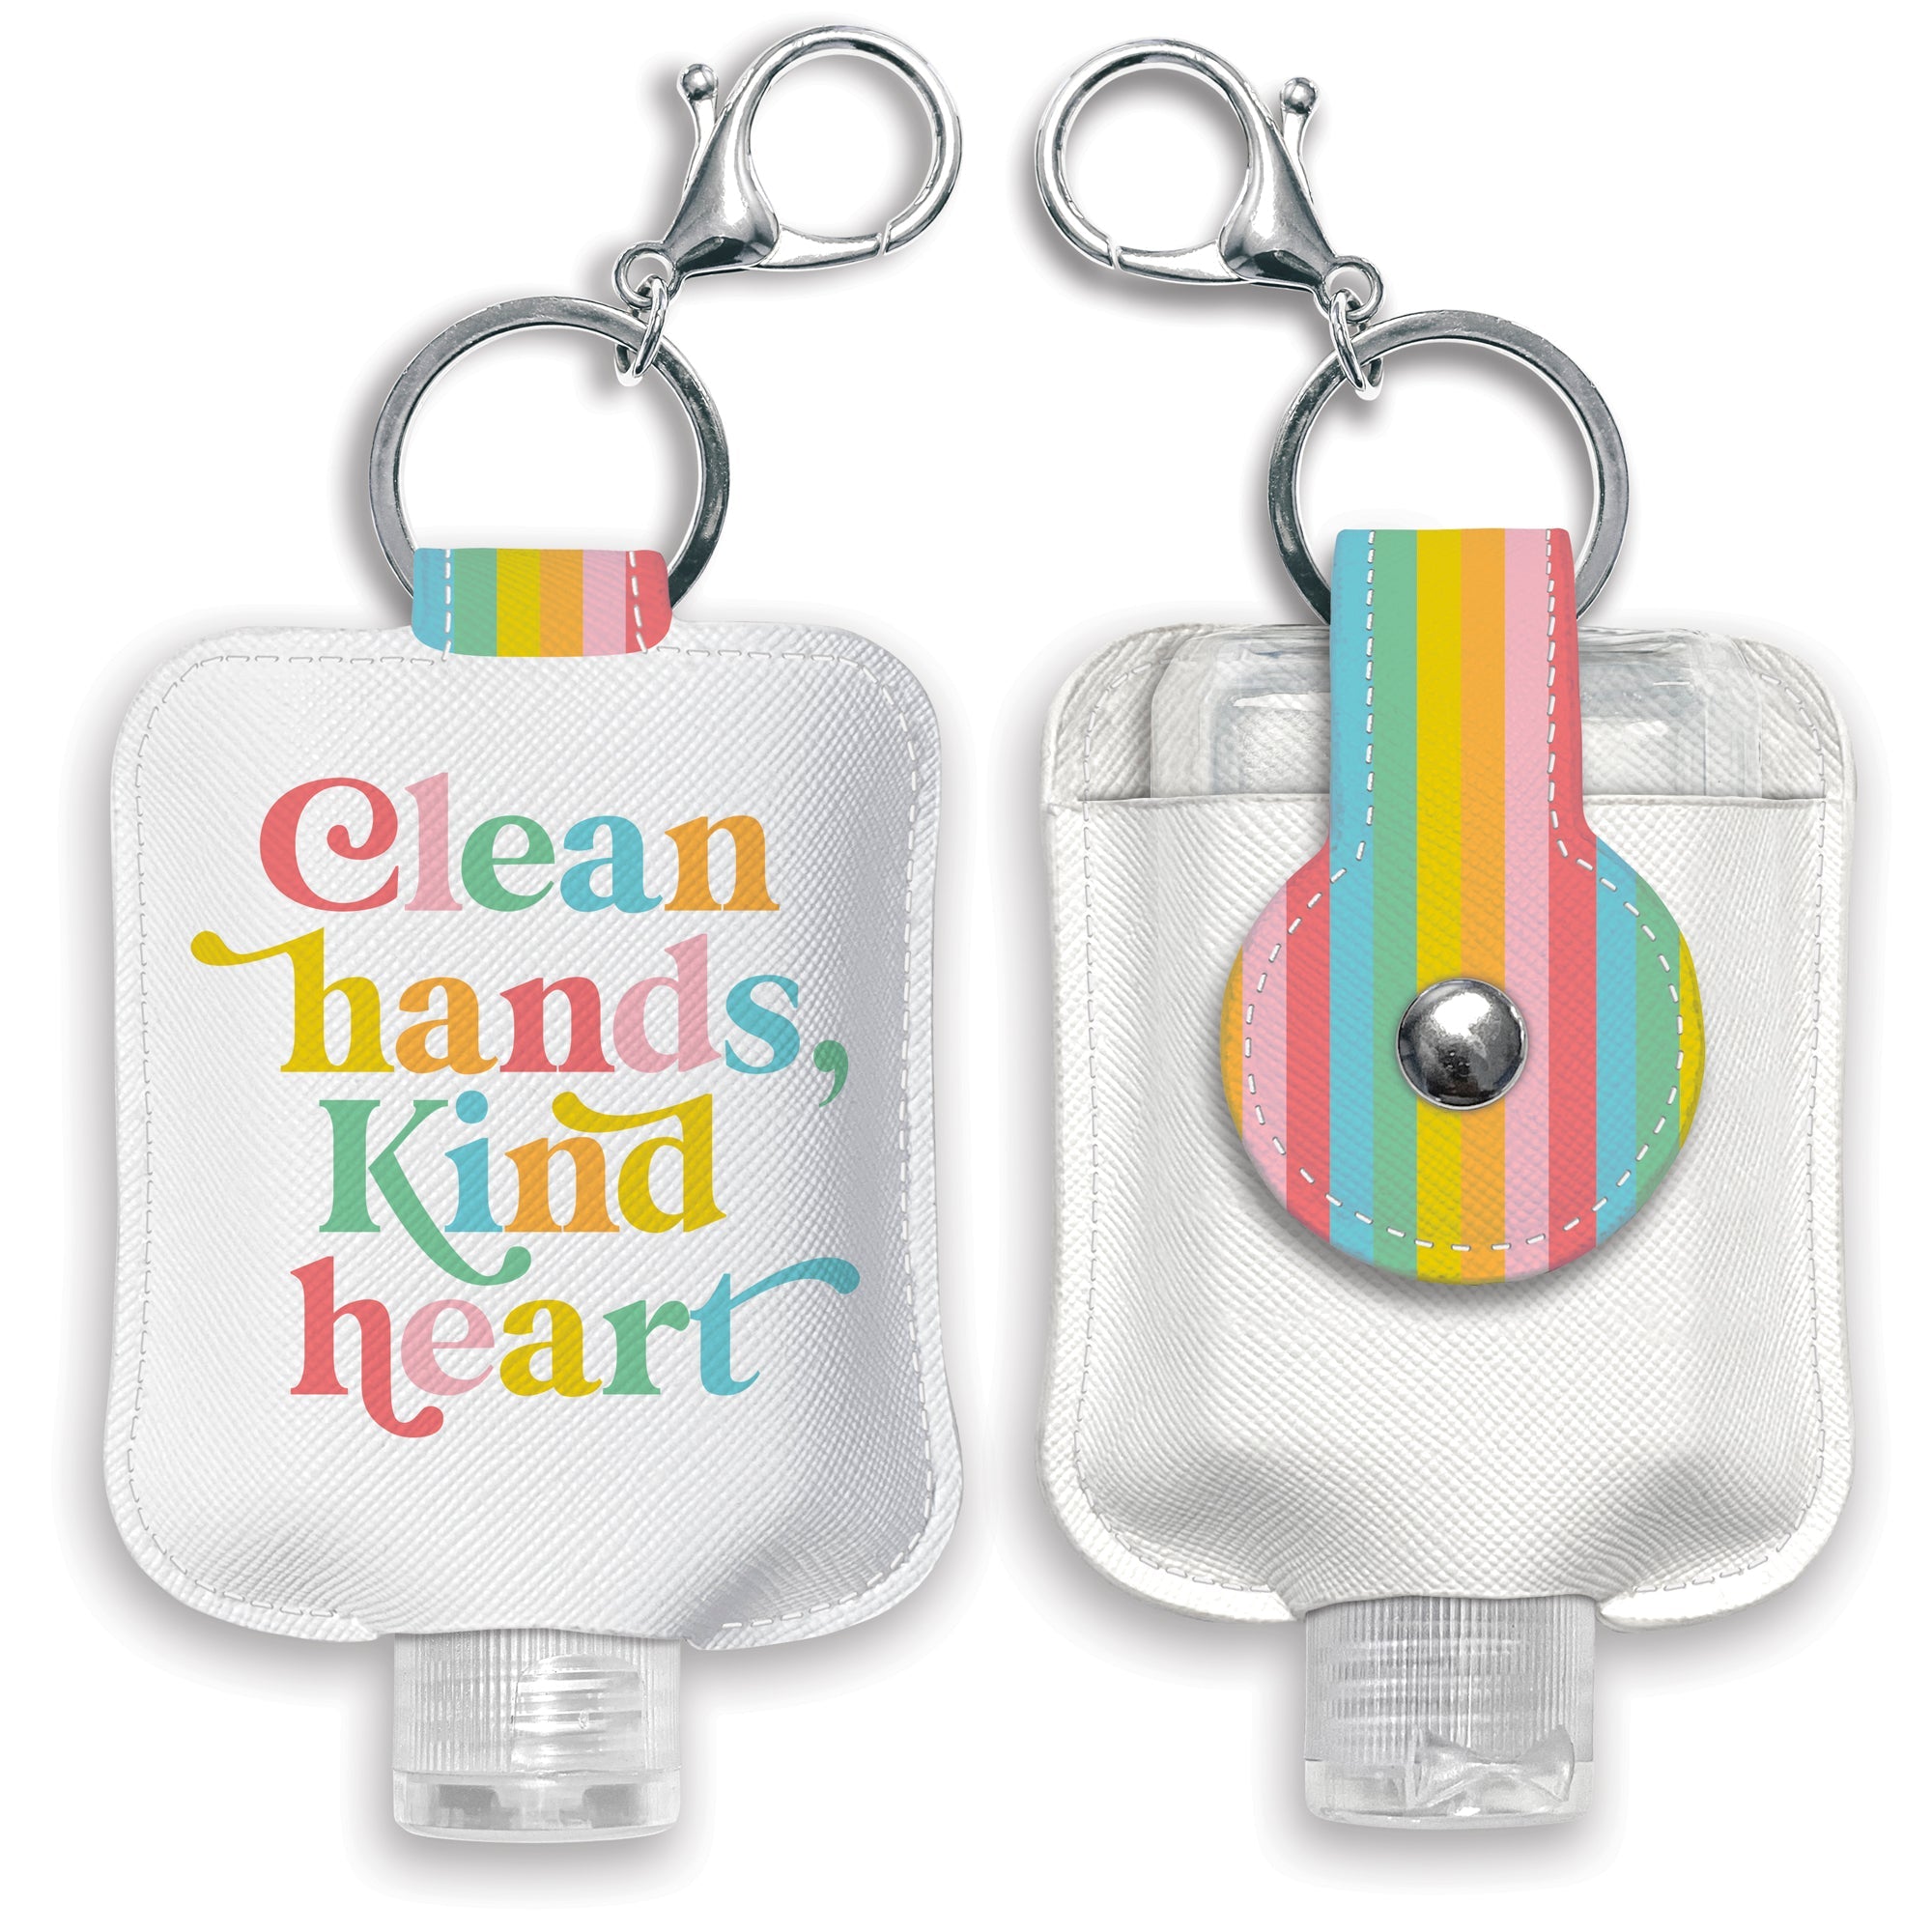 LOVANDI Hand Sanitizer Holder- Hand sanitizer holder keychain - Empty  Refillable Bottle for Hand sanitizer - Mini Travel Hand Sanitizer Keychain  Holder for Purse Backpac (Gold/White) : Amazon.in: Health & Personal Care